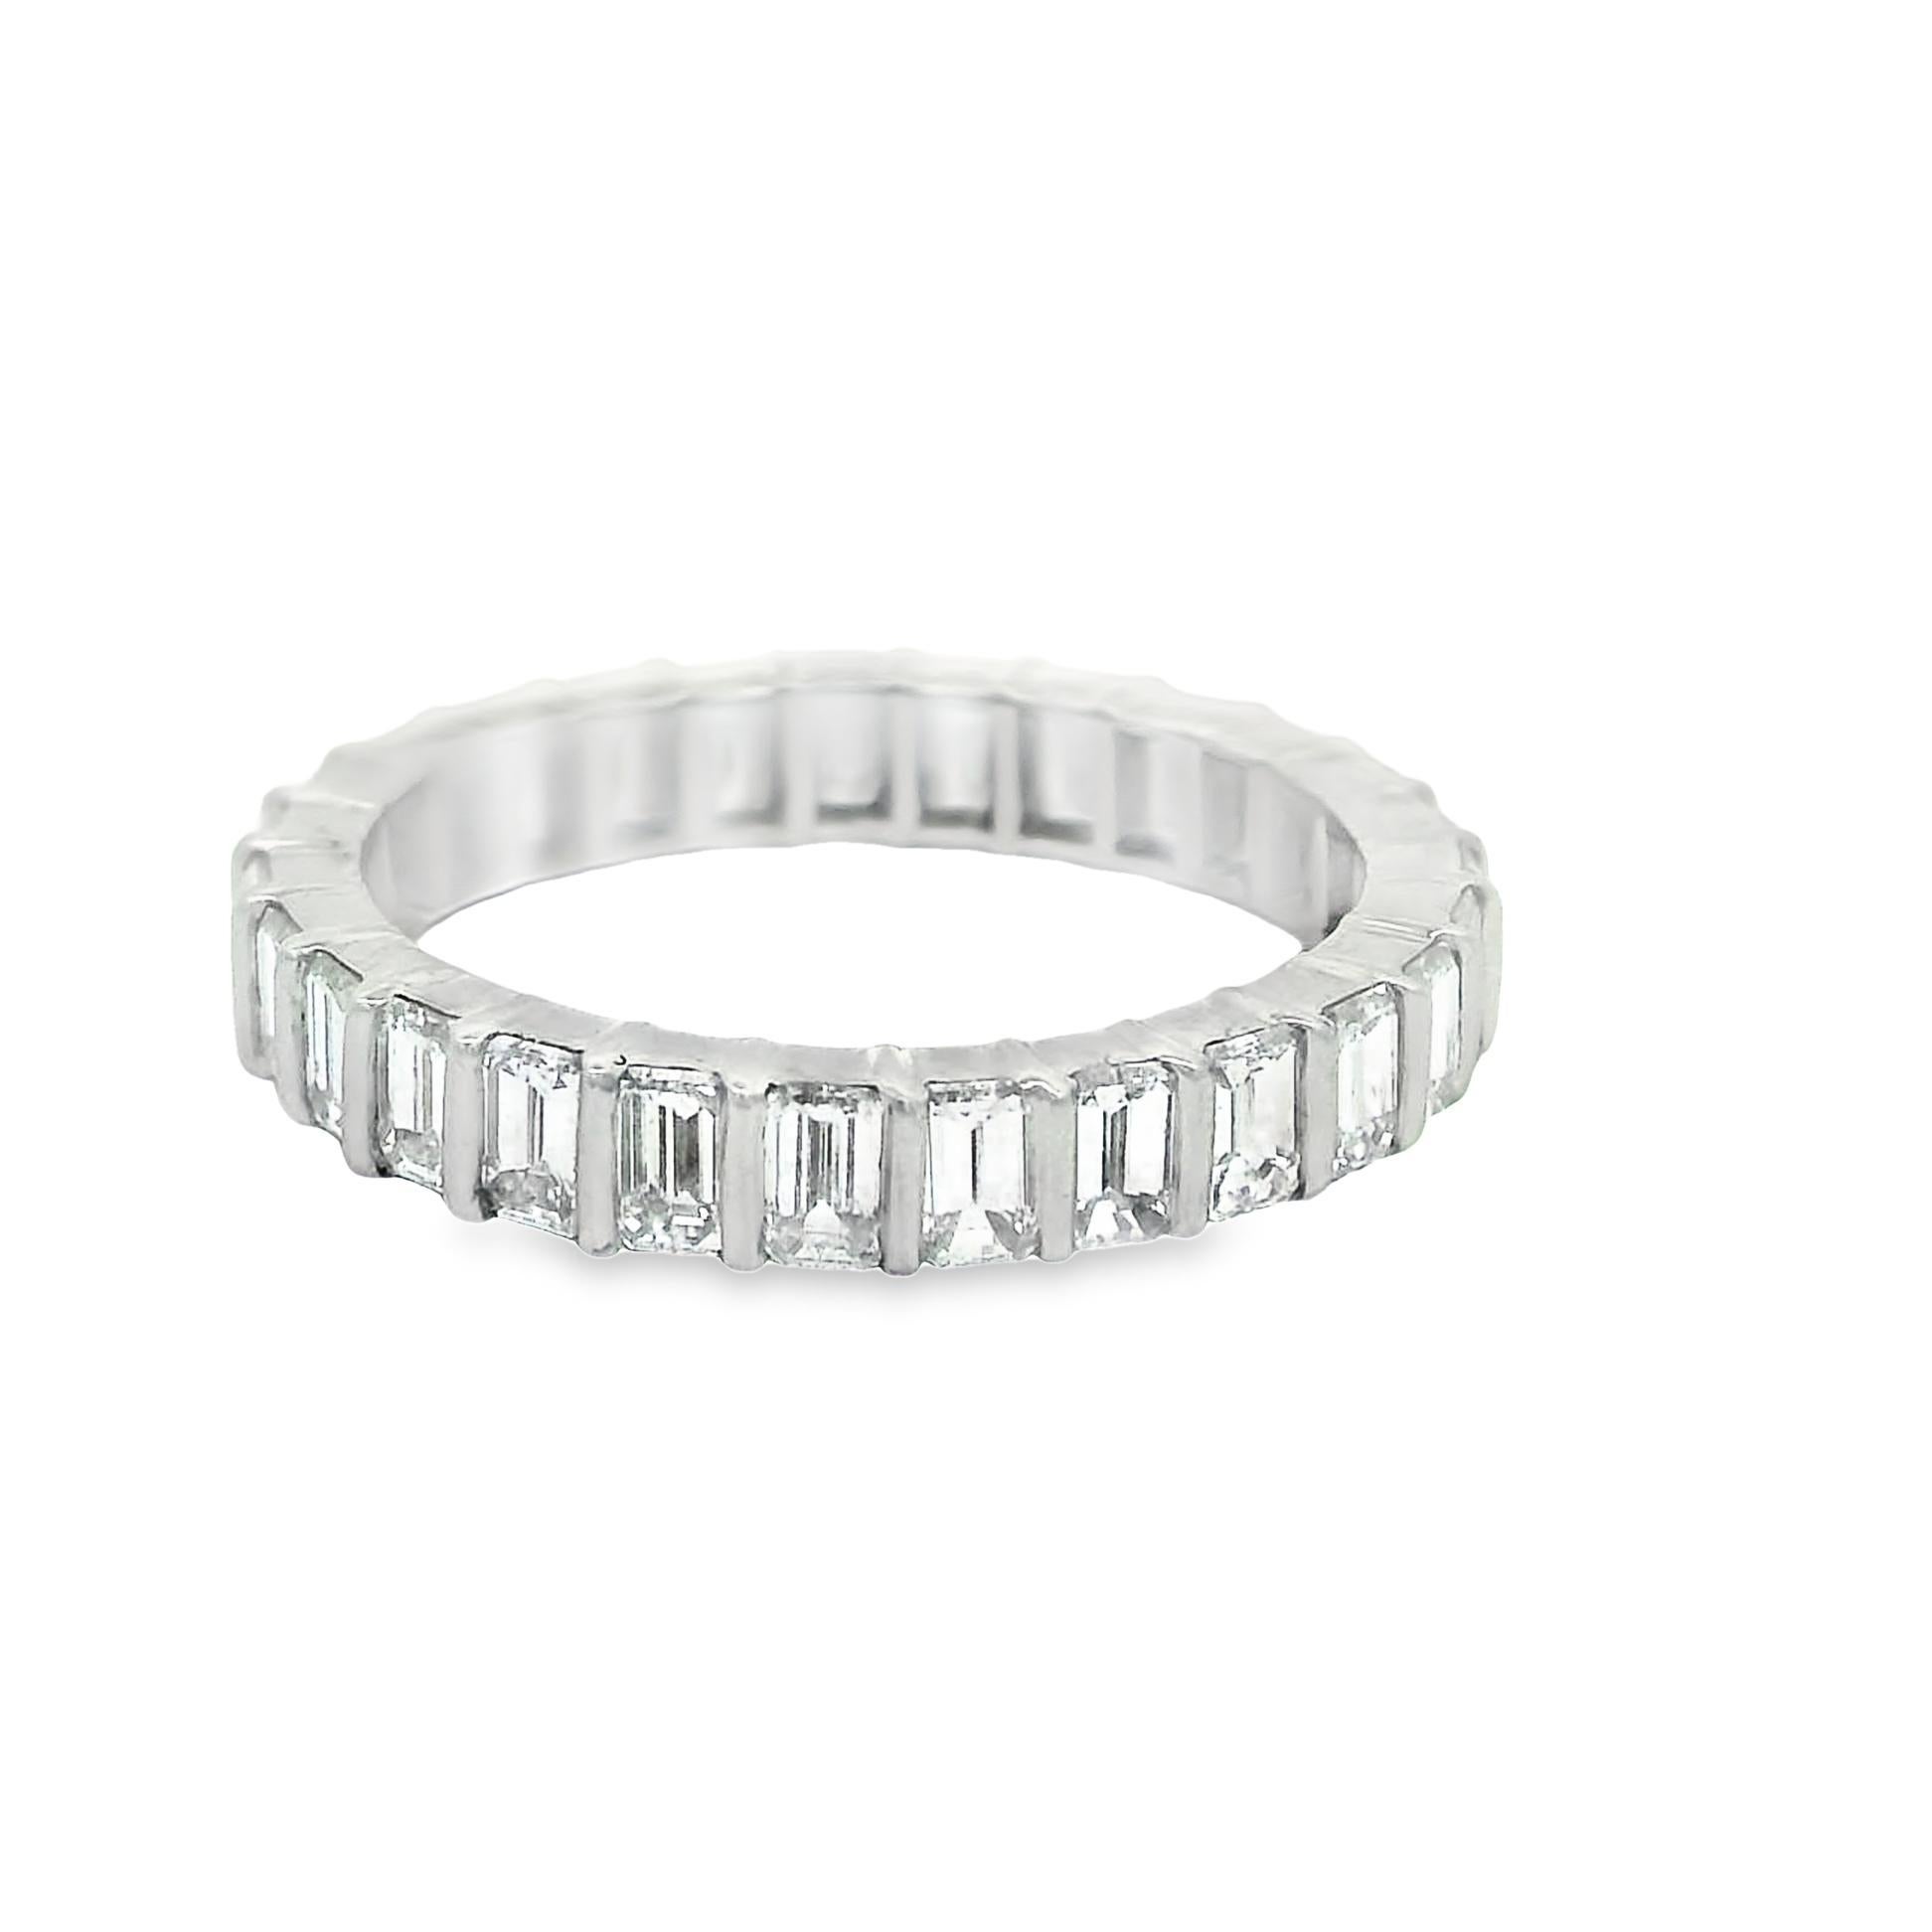 A classic diamond eternity ring featuring 2.18 carats of baguette cut diamonds. They are perfectly matching in size and color making it an impressive array of diamonds. Hand fabricated in platinum and ready to be worn.

Ring Size 5.75

Weight: 3.9